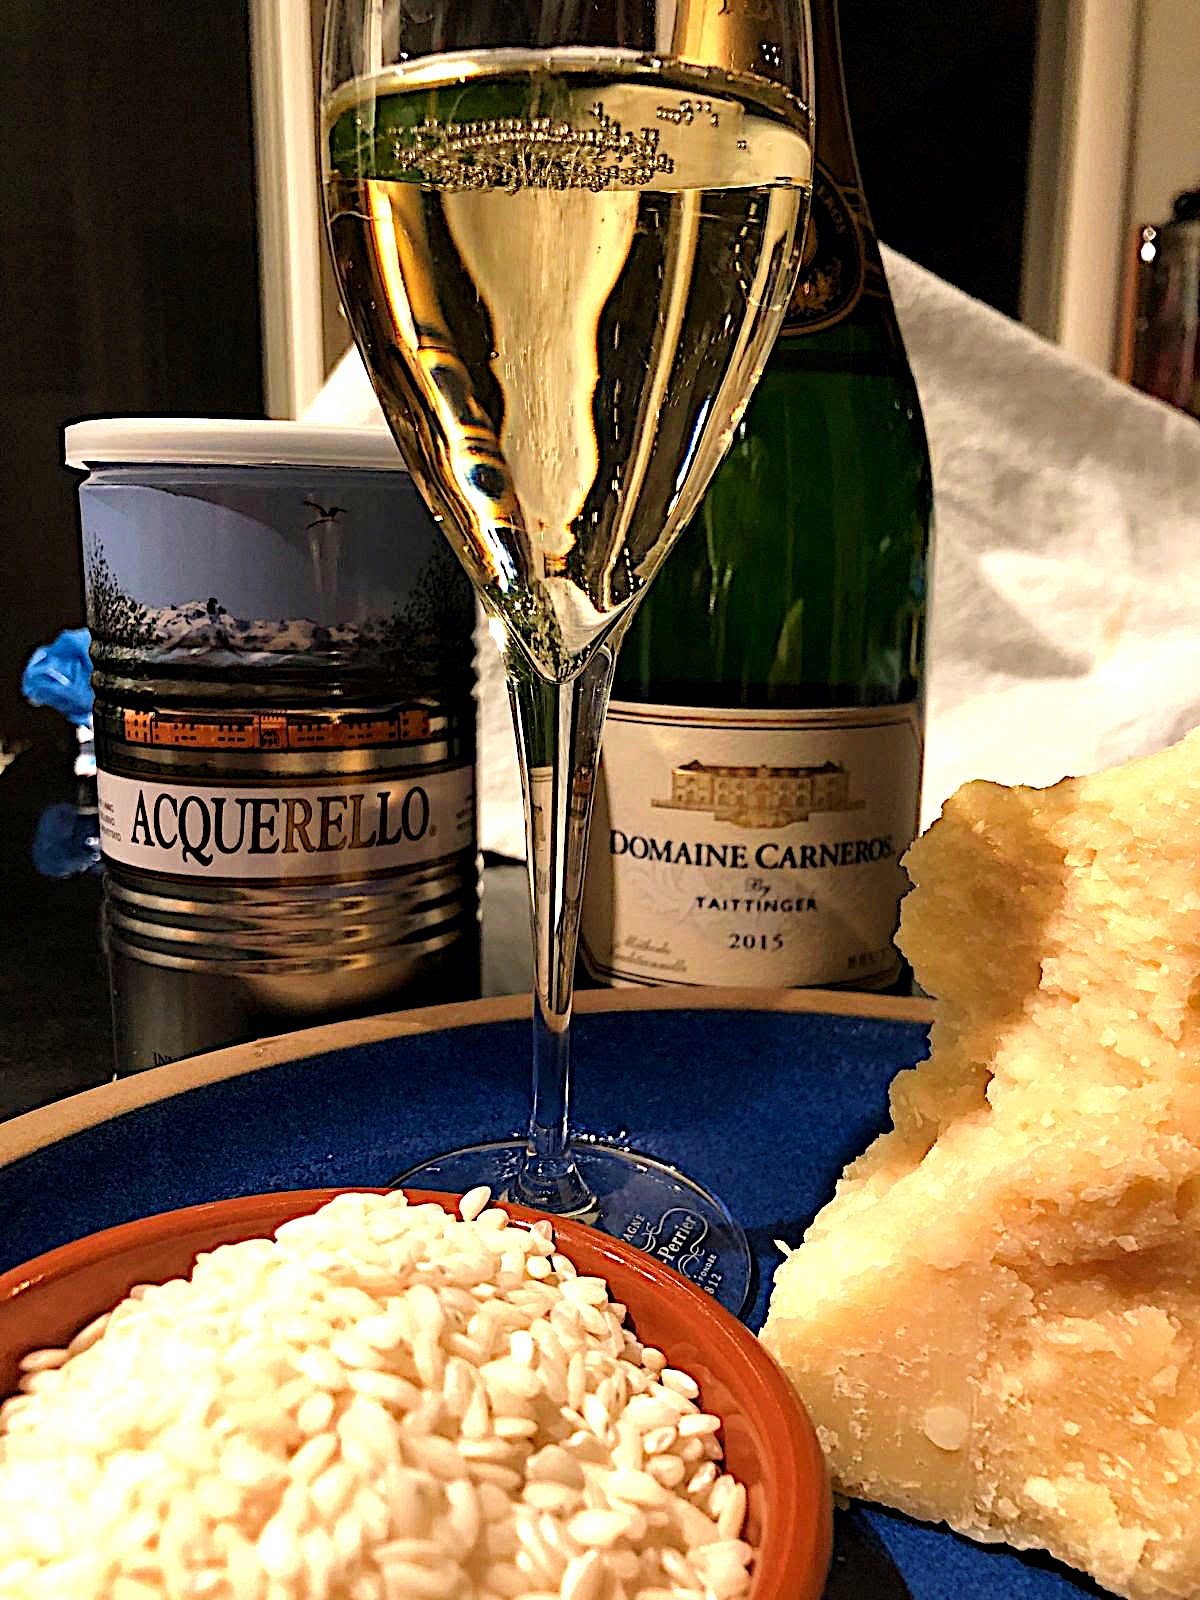 Sparkling wine and the king of cheeses come together to make one terrific meal.